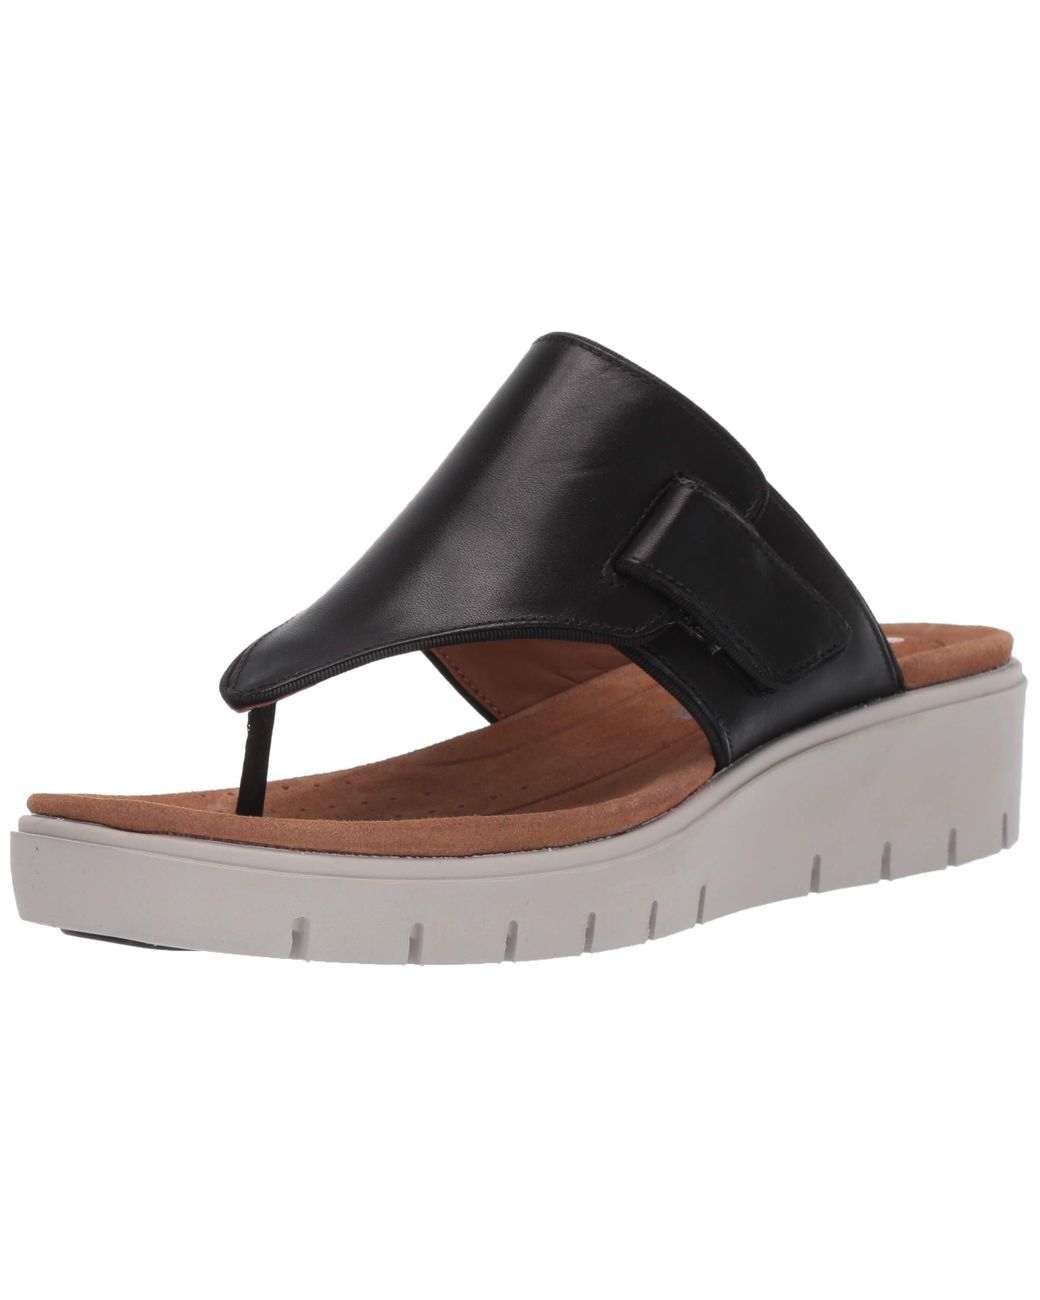 Clarks Leather Un Karely Sea Sandal in Black Leather (Black) - Save 65% -  Lyst